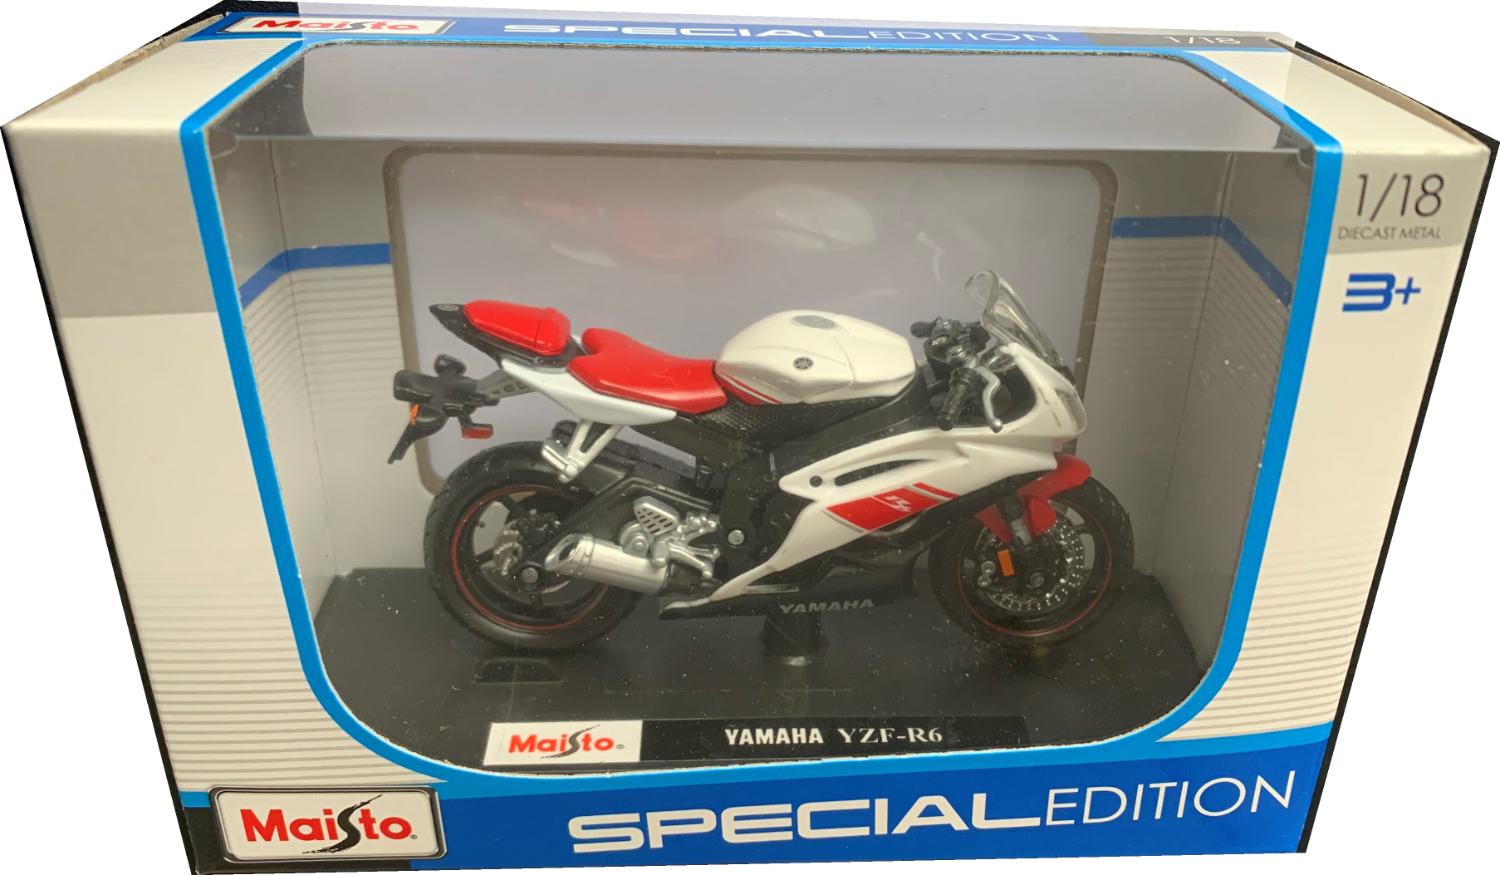 Yamaha YZF-R6 in red /white 1:18 scale motorbike model from Maisto